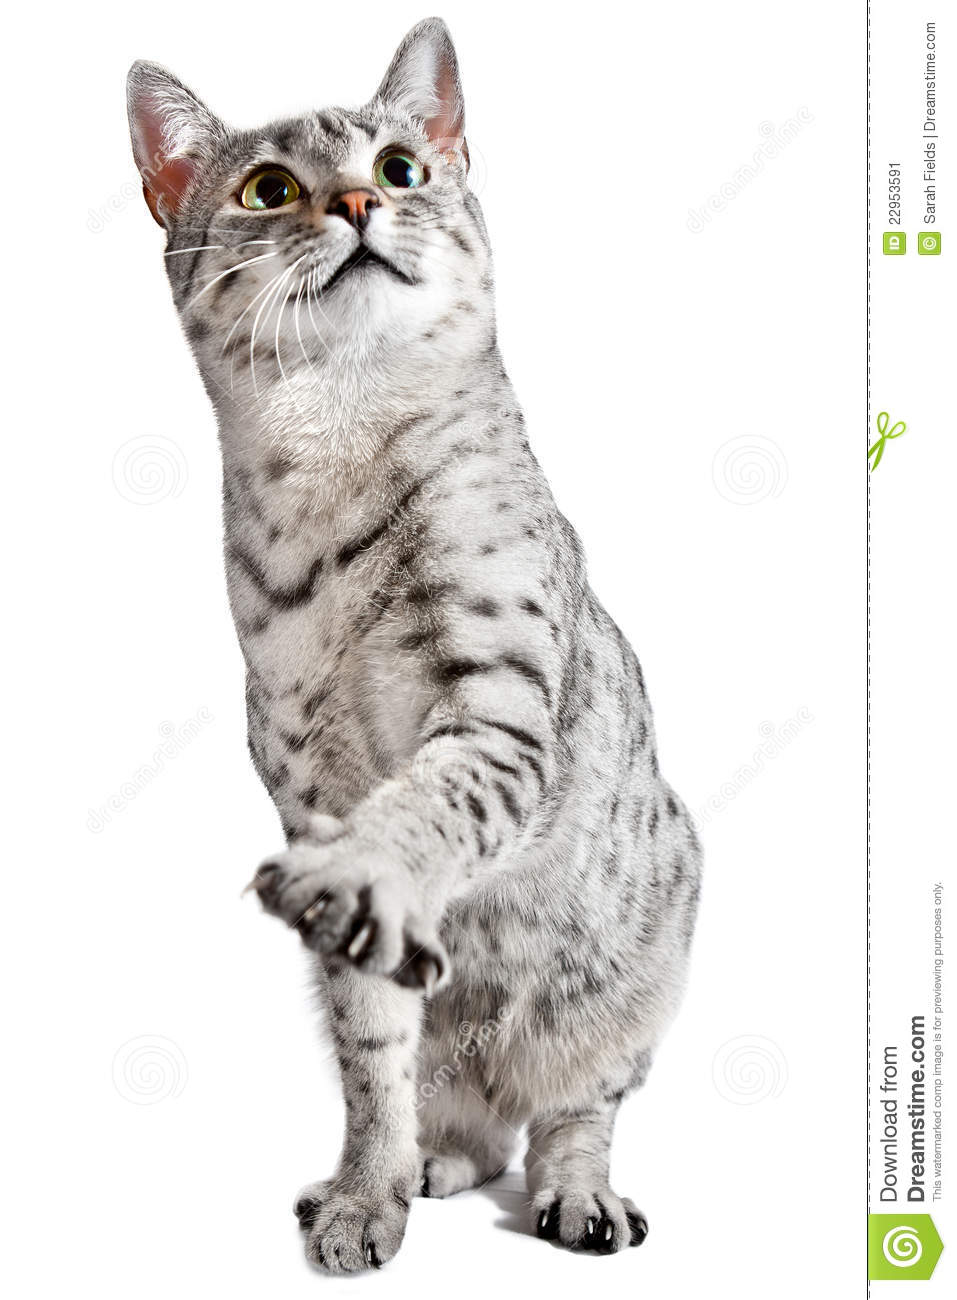 Cute Cat With One Paw Raised Stock Image   Image  22953591